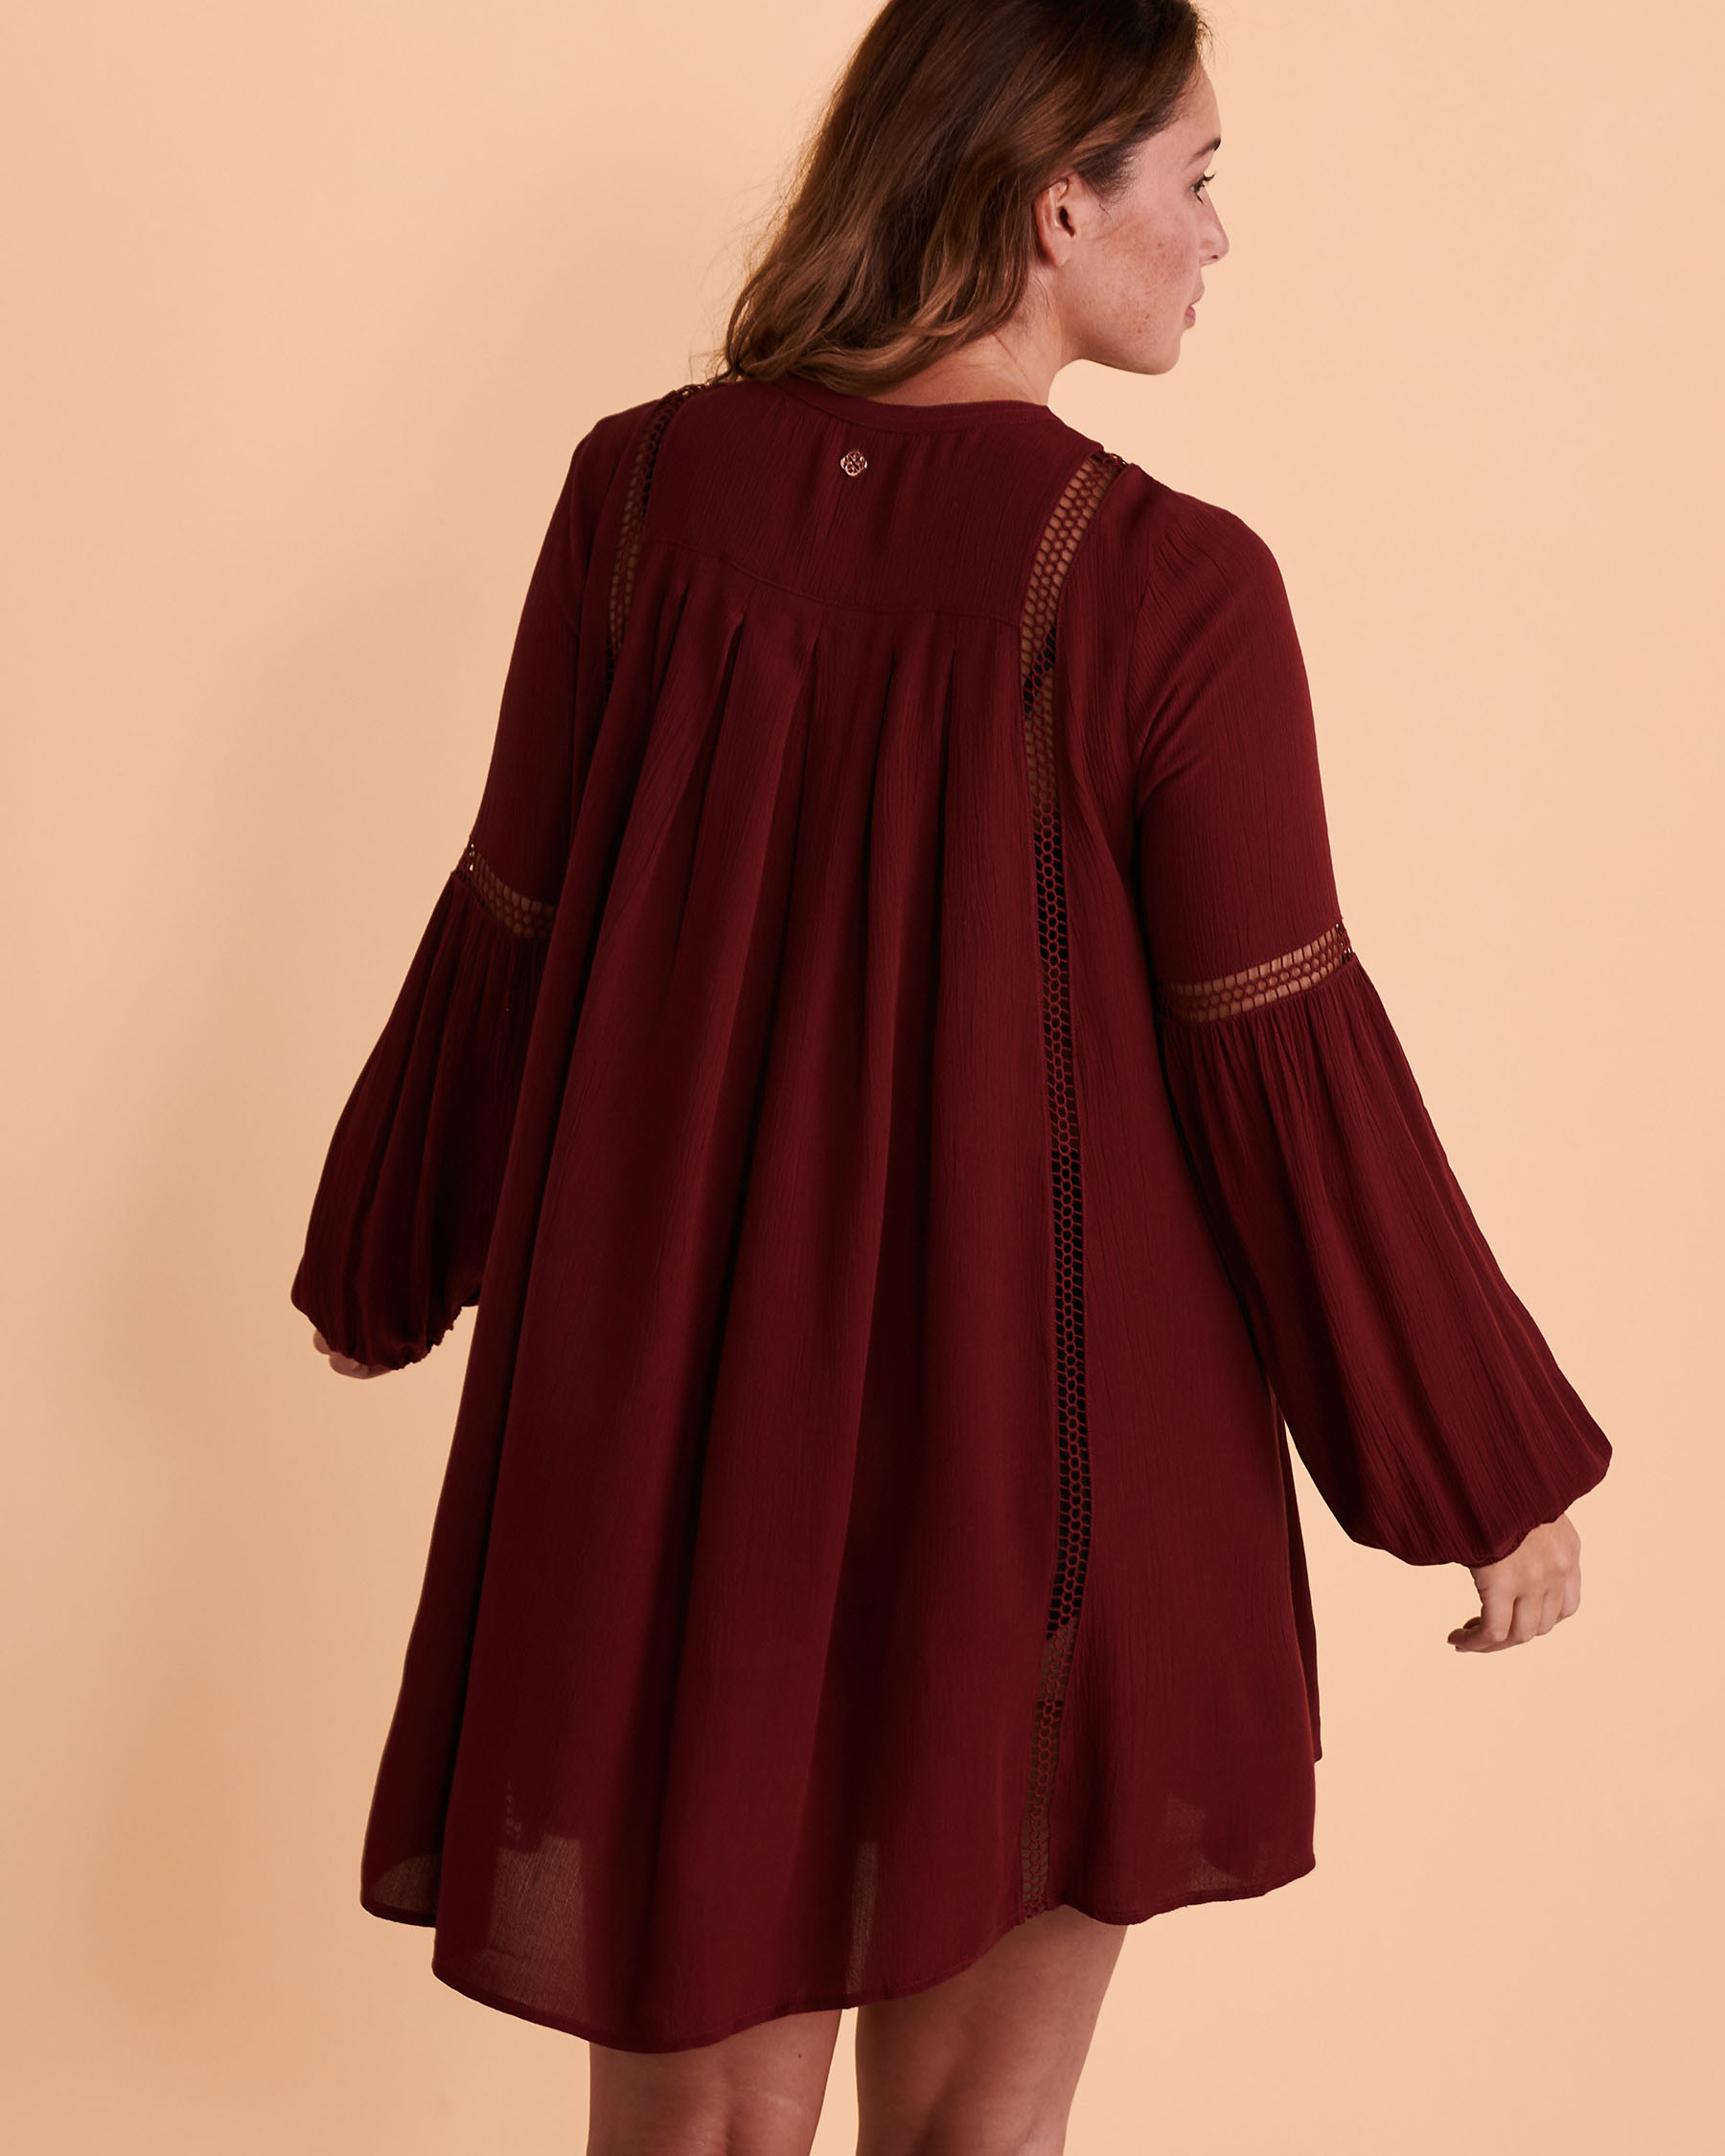 TURQUOISE COUTURE Long Sleeve Dress with Crochet Detail Red wine 02300073 - View2